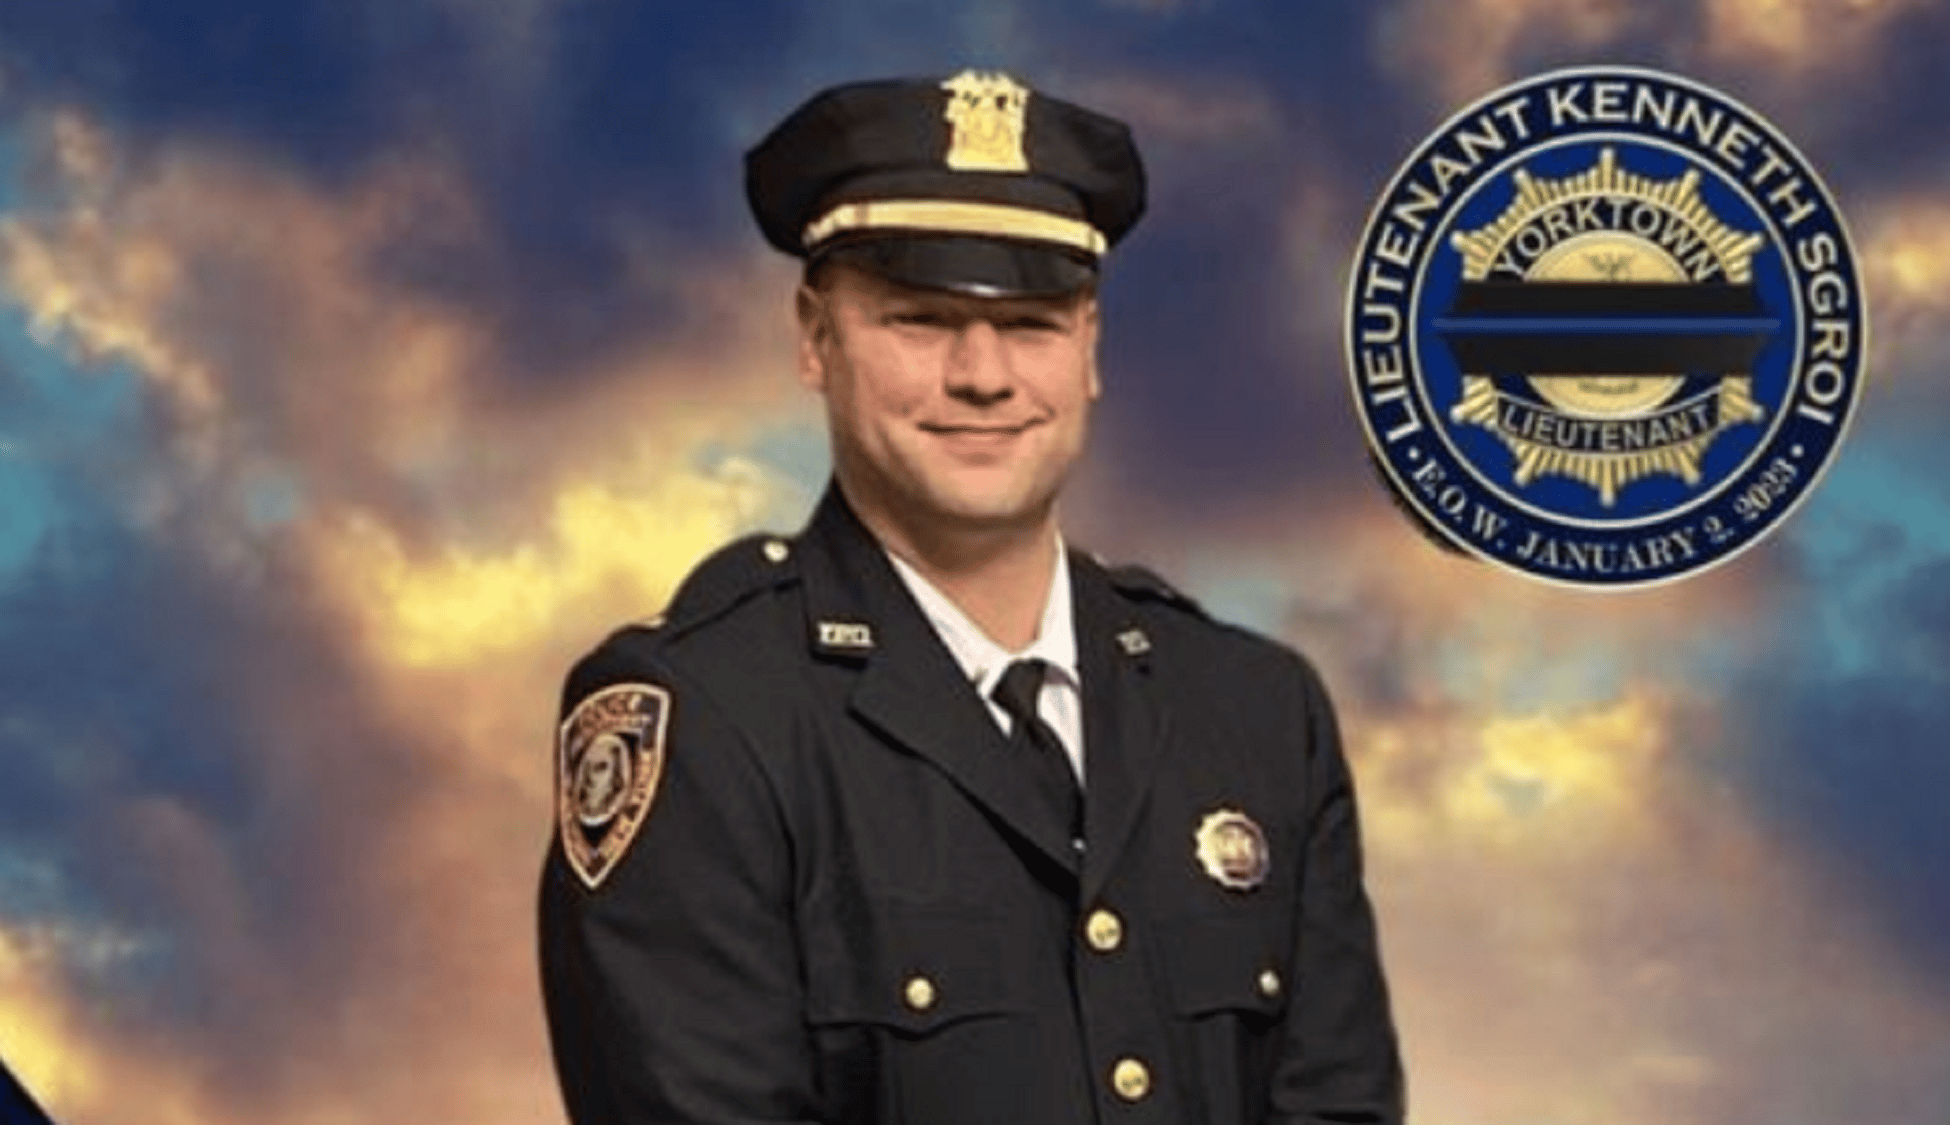 Police lieutenant dies suddenly at 37 years old